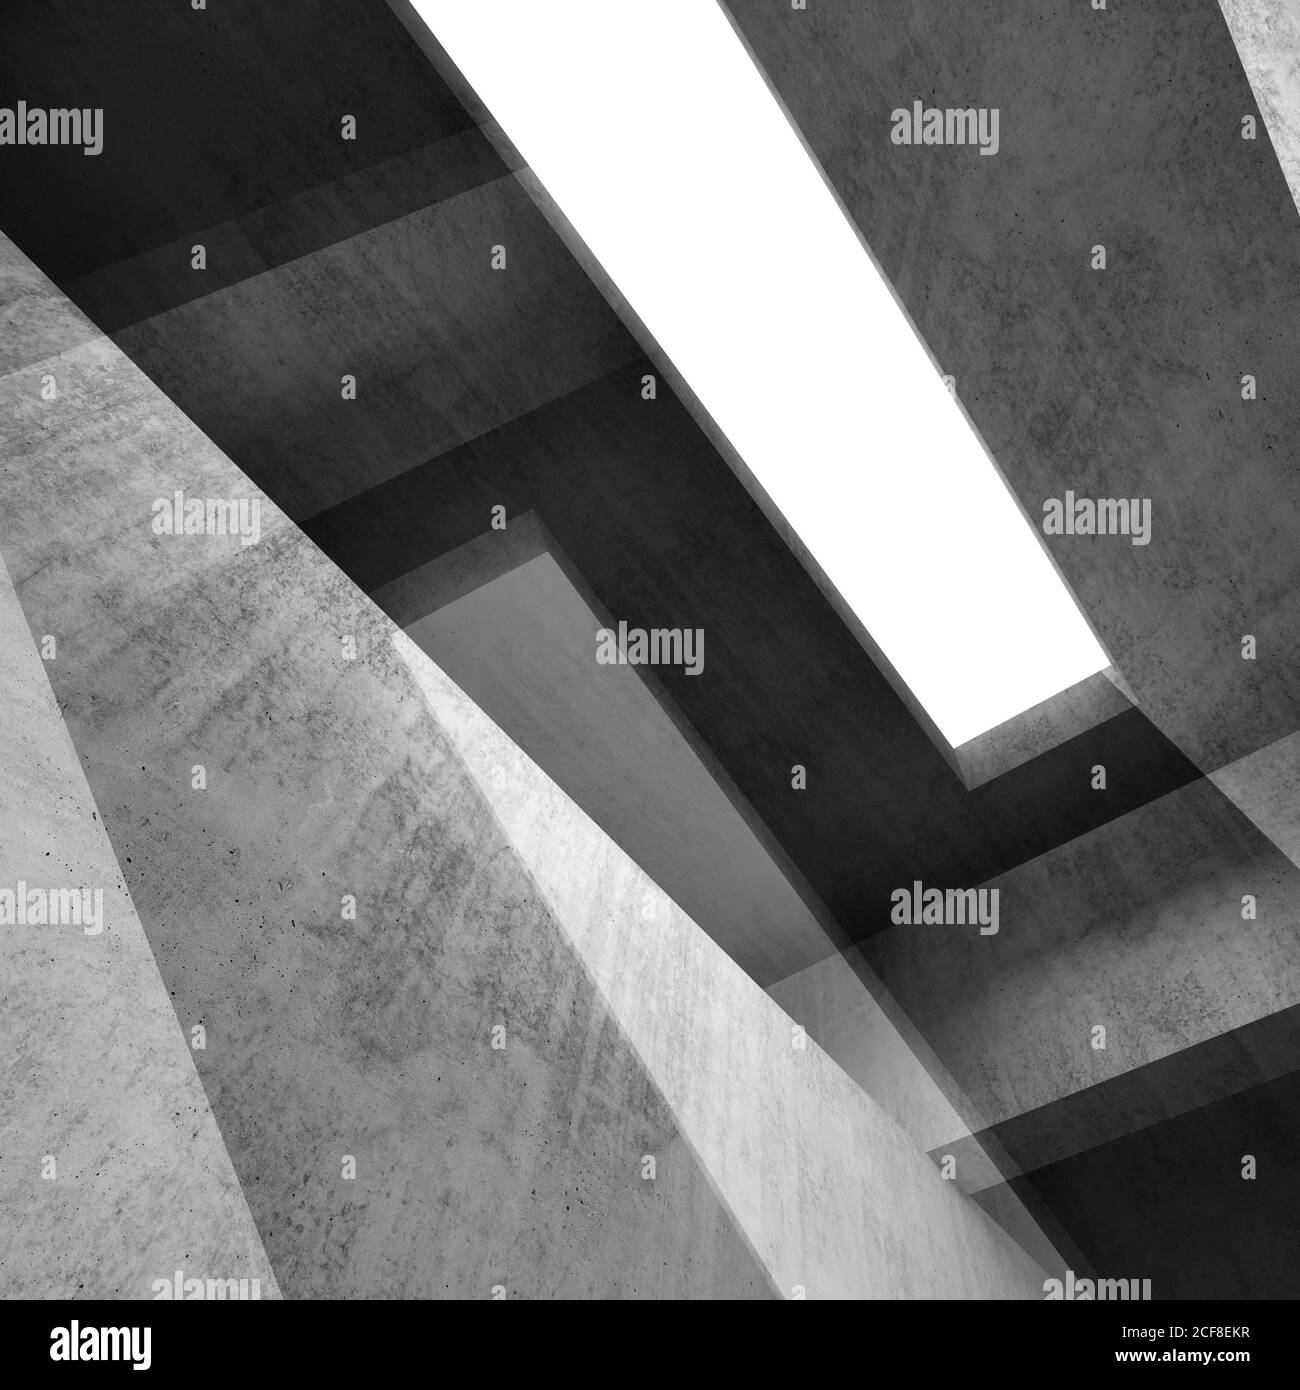 Abstract dark background, intersected concrete structures. Square digital illustration with double exposure effect, 3d render illustration Stock Photo